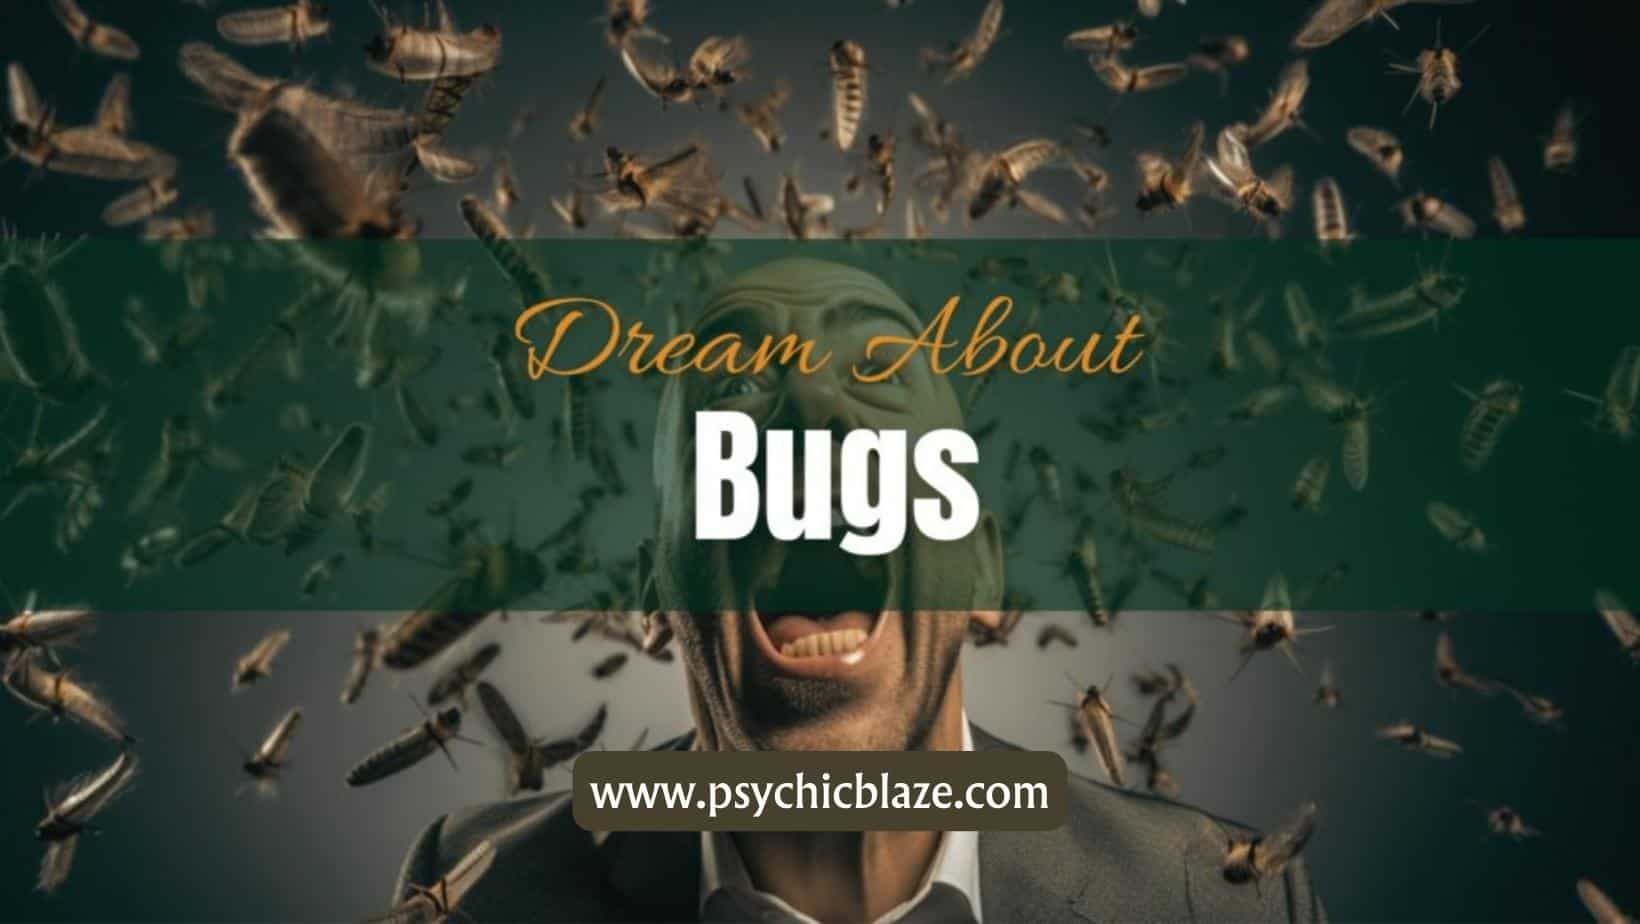 Dream about Bugs